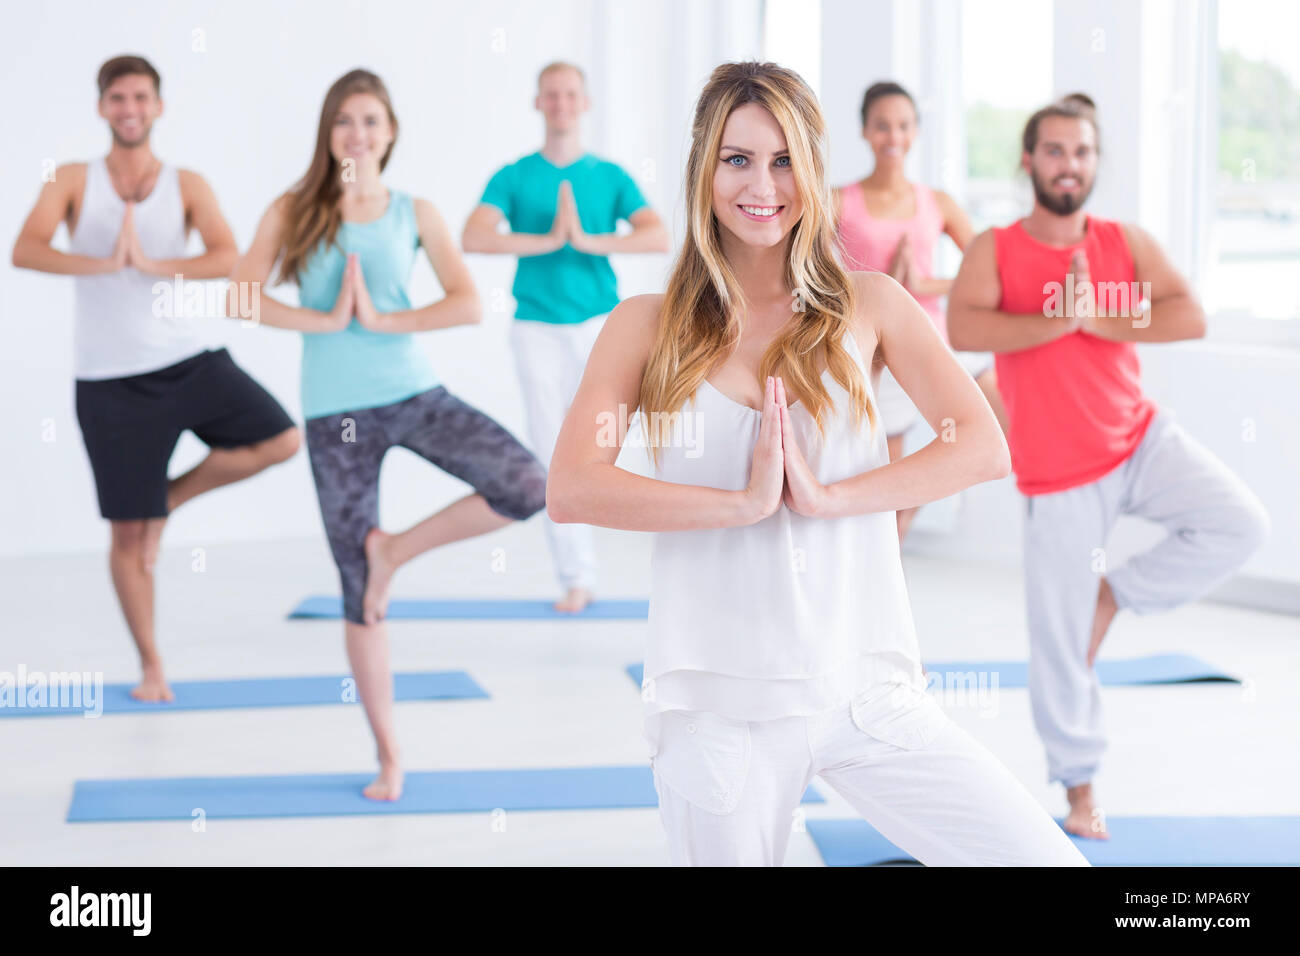 Shot of young woman instructing a group in pilates class Stock Photo